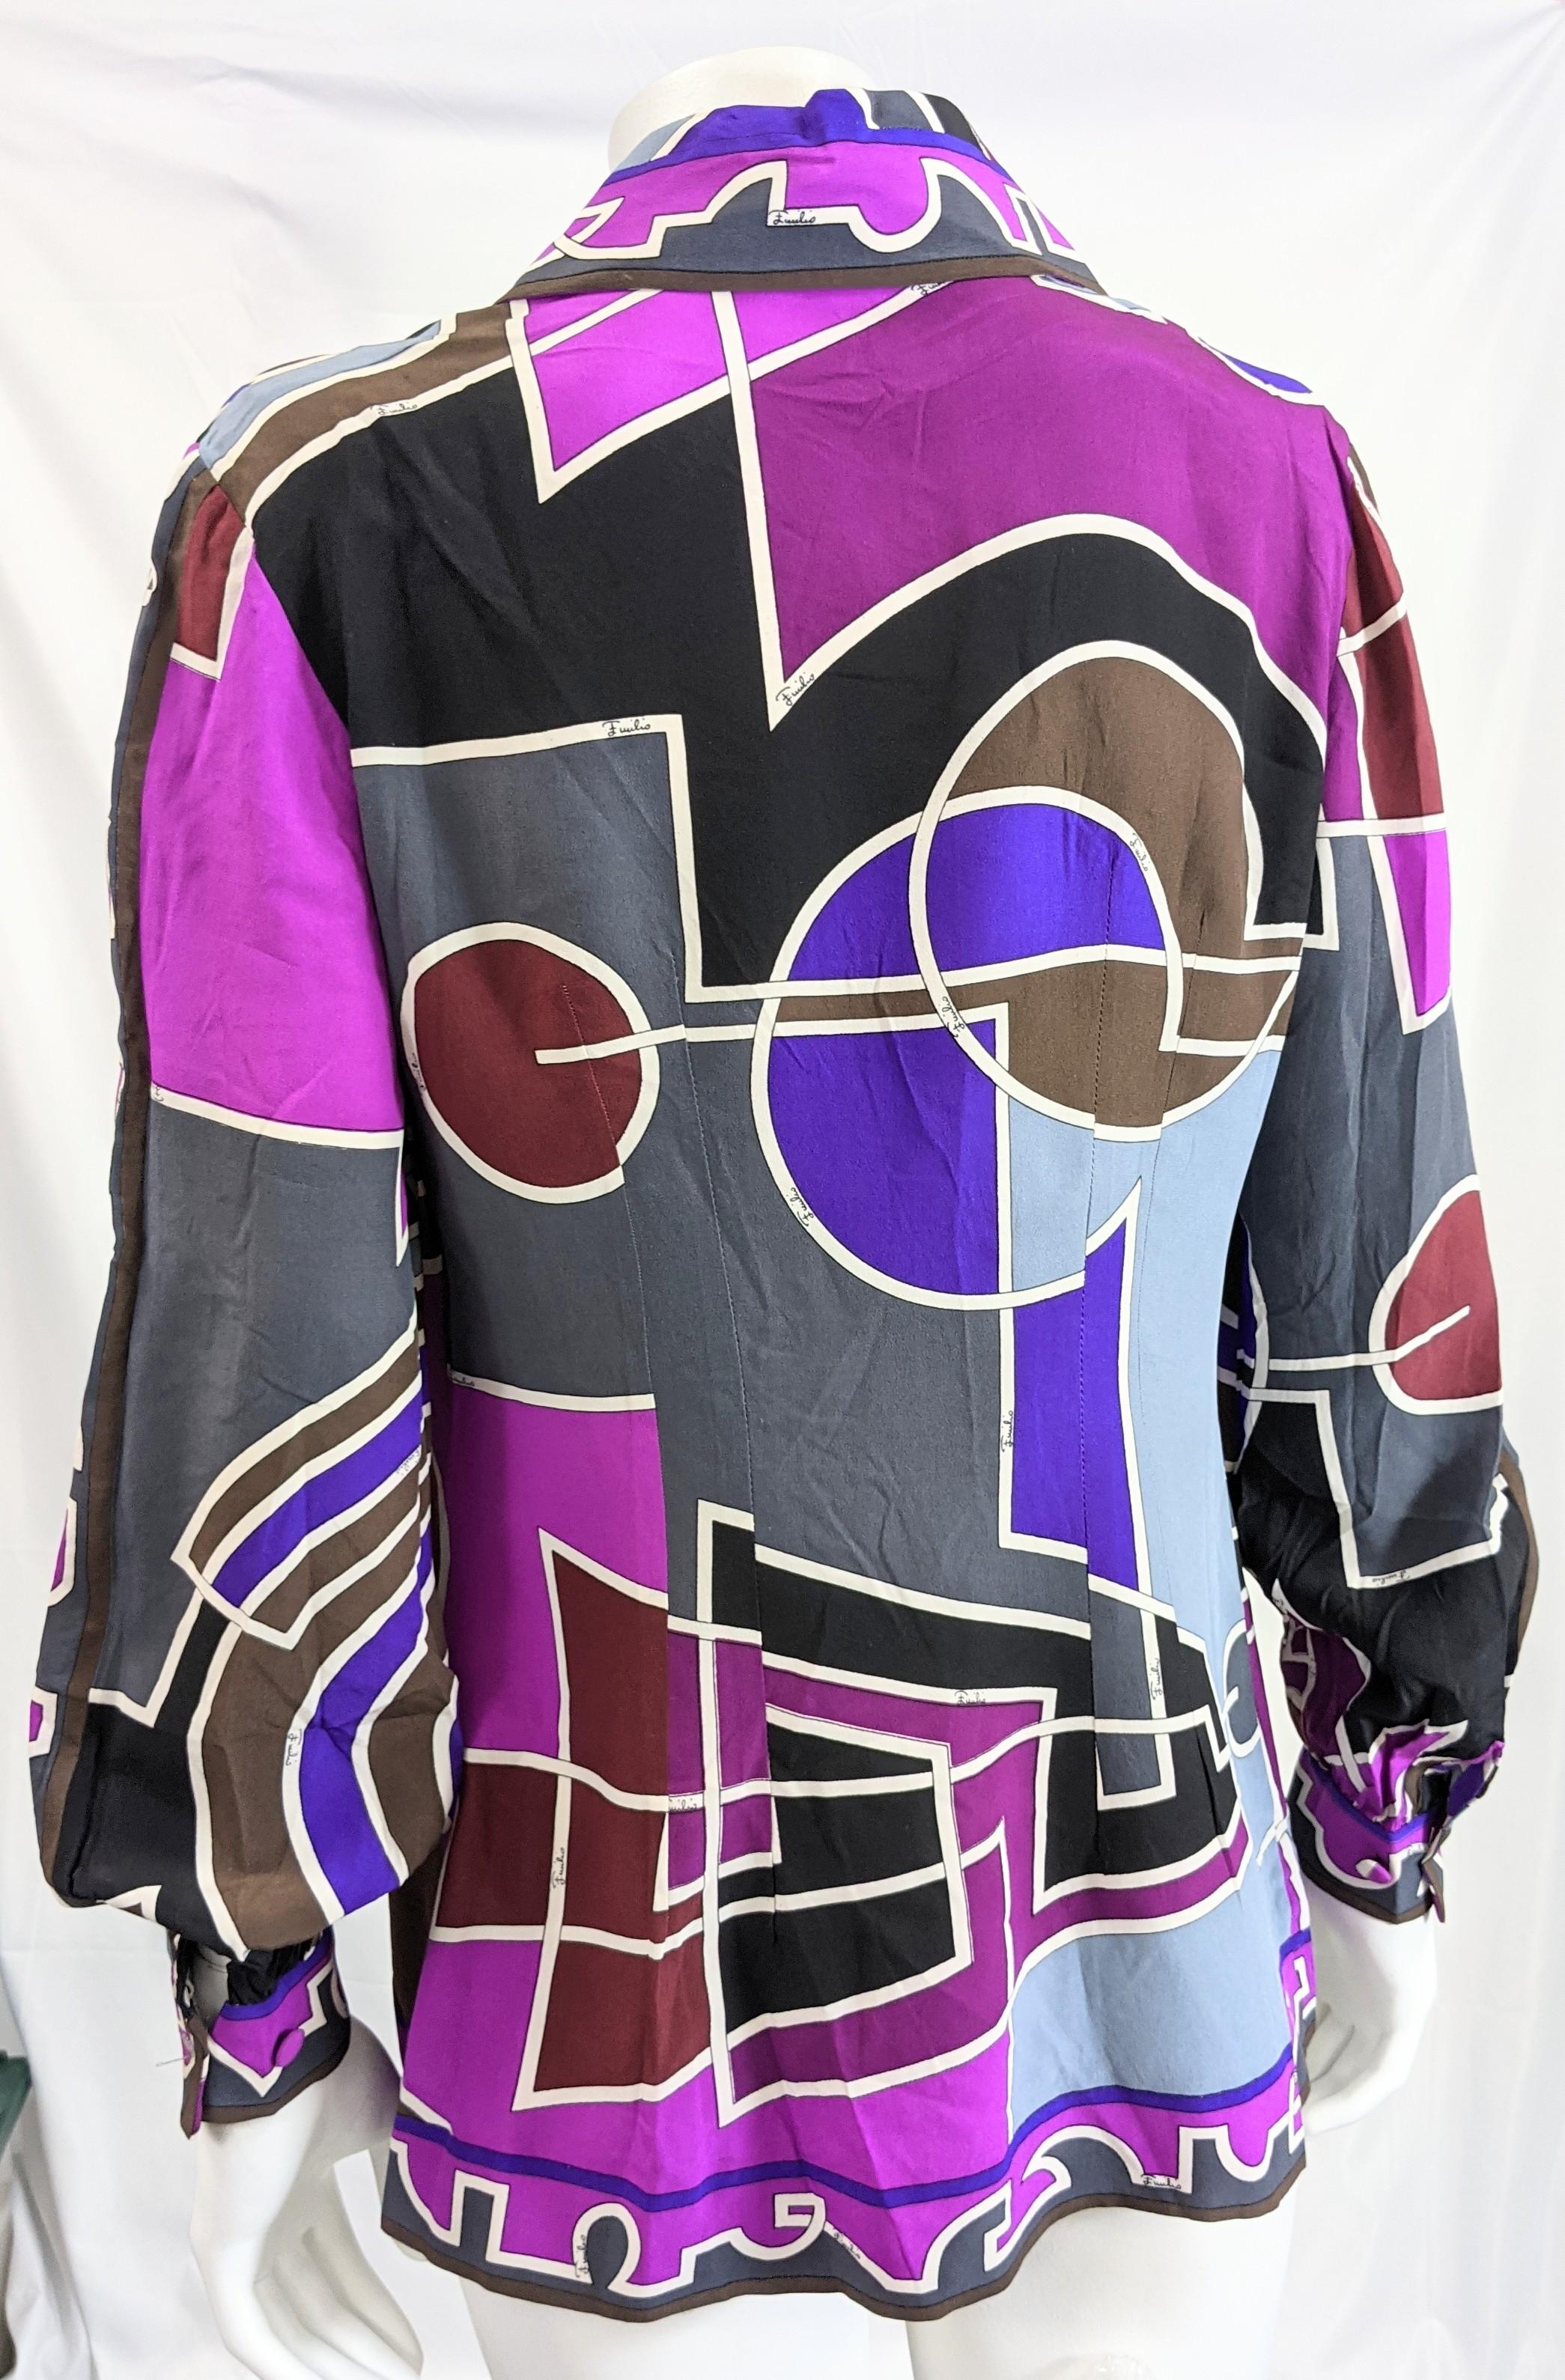 Emilio Pucci Silk Crepe Shirt In Excellent Condition For Sale In New York, NY